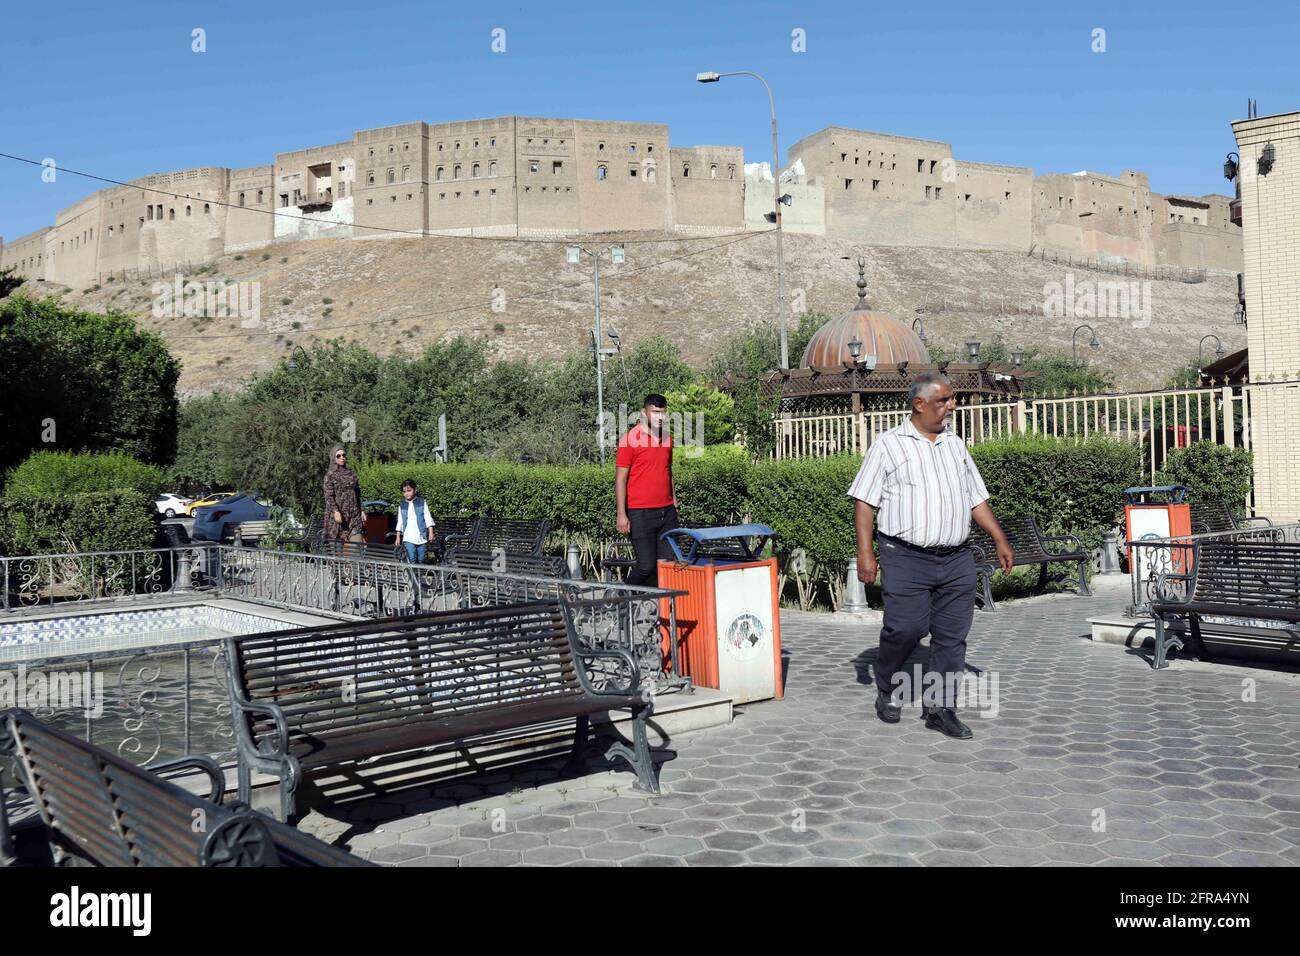 Erbil. 20th May, 2021. Photo taken on May 20, 2021 shows the general view of the Citadel of Erbil in downtown Erbil, Iraq. The ancient Citadel of Erbil, capital of Iraq's semi-autonomous region of Kurdistan, witnesses daily visits of hundreds of people, including foreign tourists, after the regional health authorities lifted the full curfew before the Eid al-Fitr holiday. Credit: Khalil Dawood/Xinhua/Alamy Live News Stock Photo